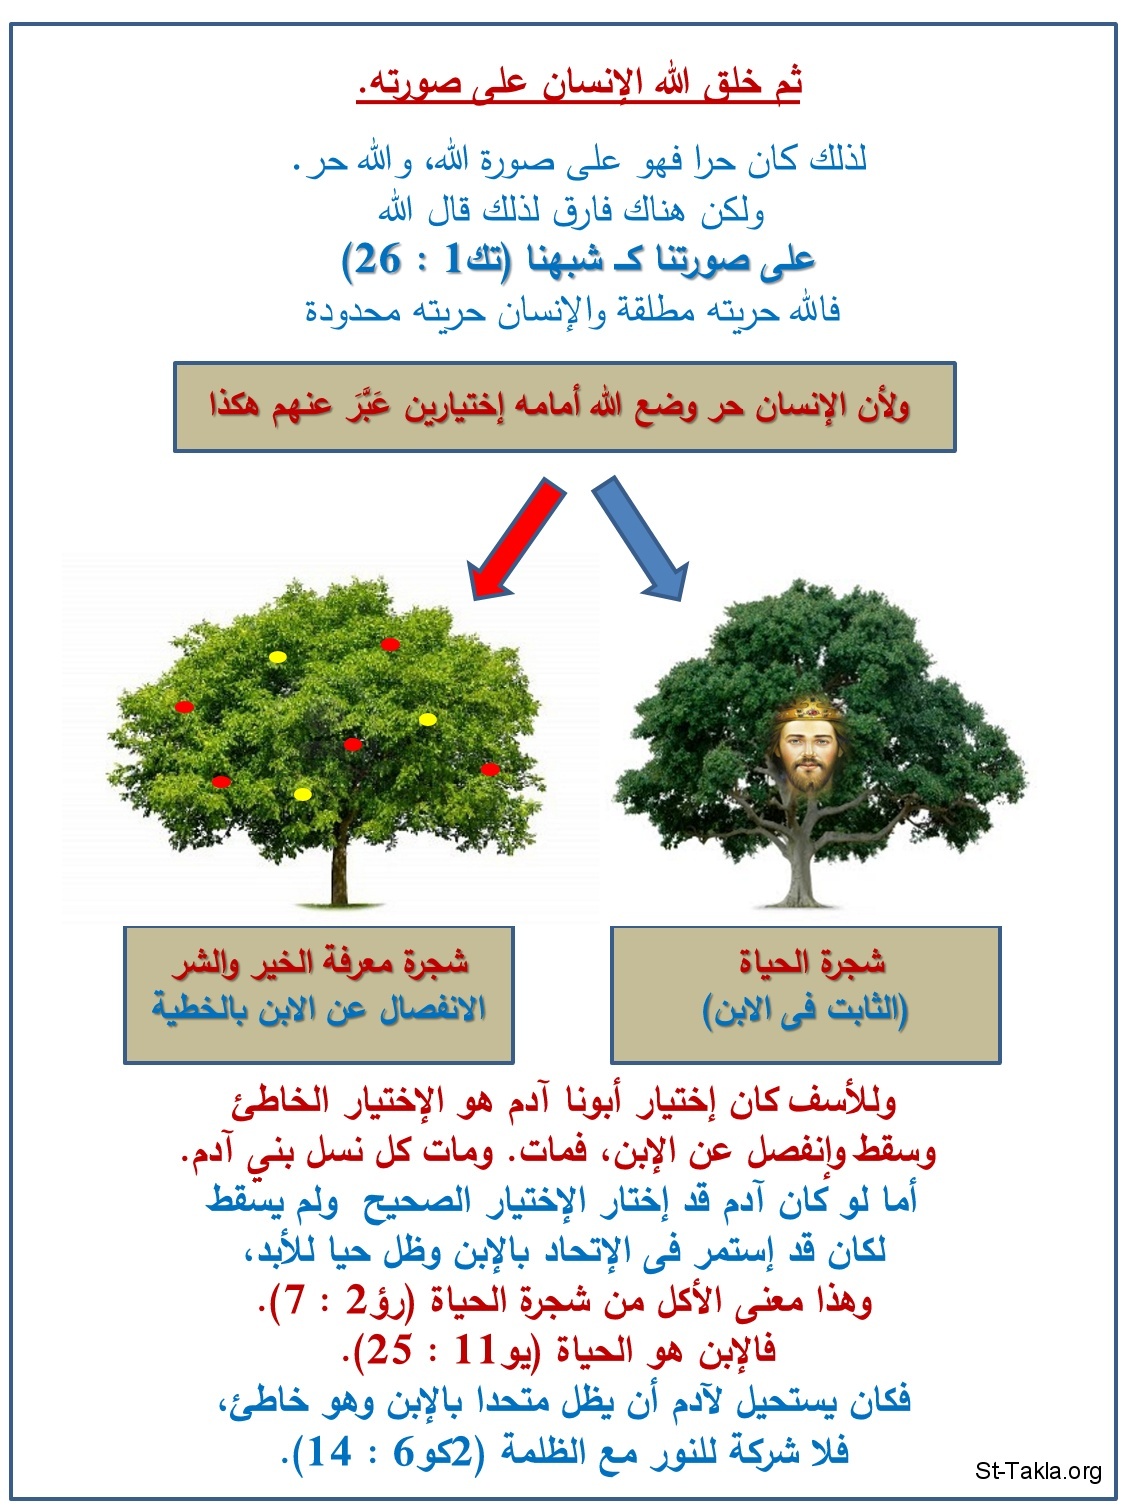 St-Takla.org Image: Man's creation, and tree choices: graph     :     -  